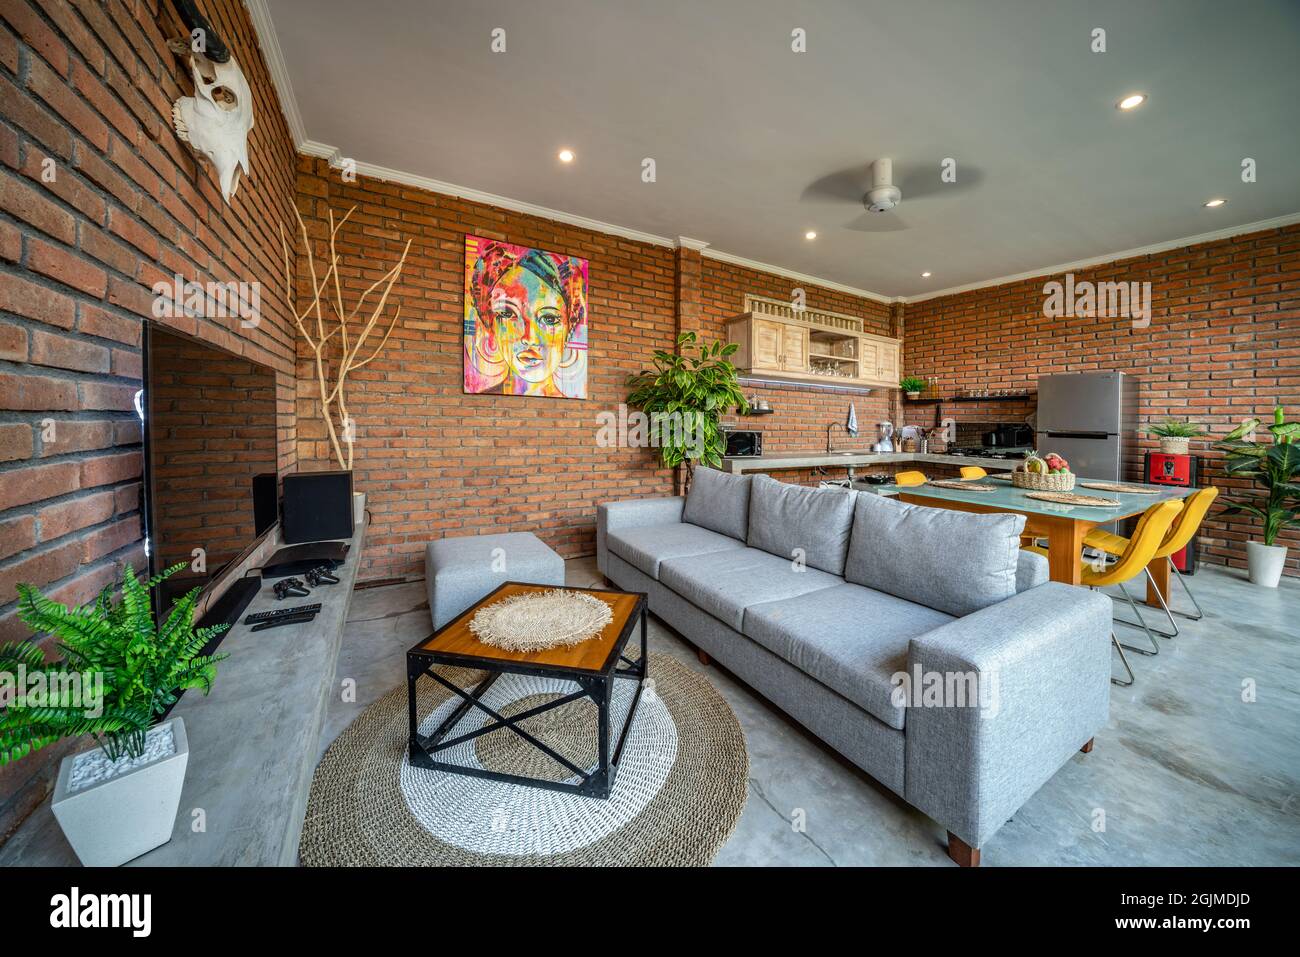 Canggu, Bali, Indonesia, 12 August 2018. Beautiful living room interior with orange brick walls and view of kitchen in new luxury home. Home Interior Stock Photo